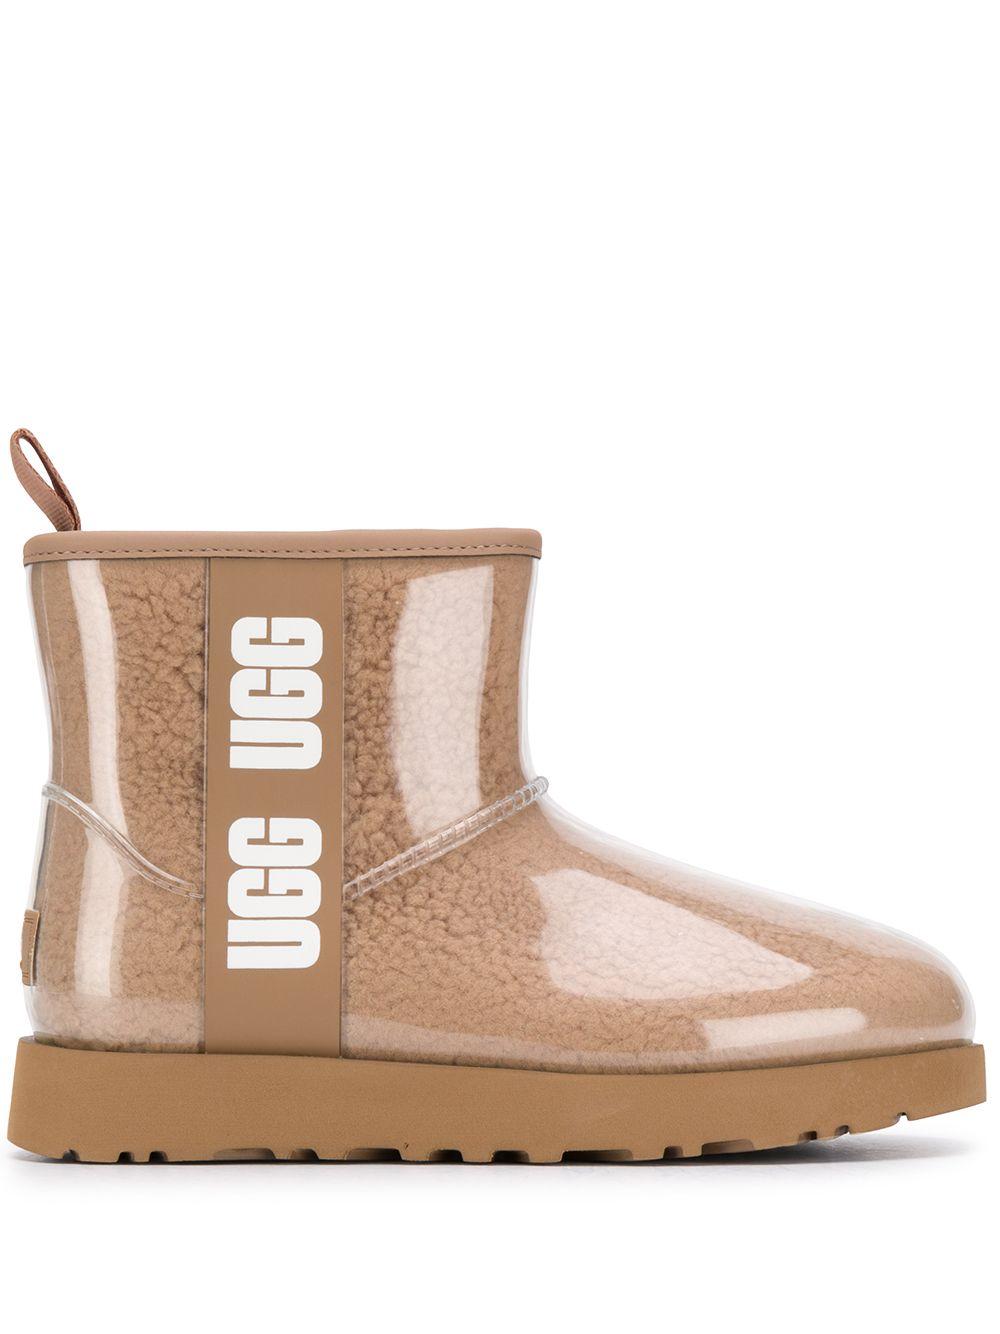 UGG Mini Classic Clear Boots in Natural | Lyst